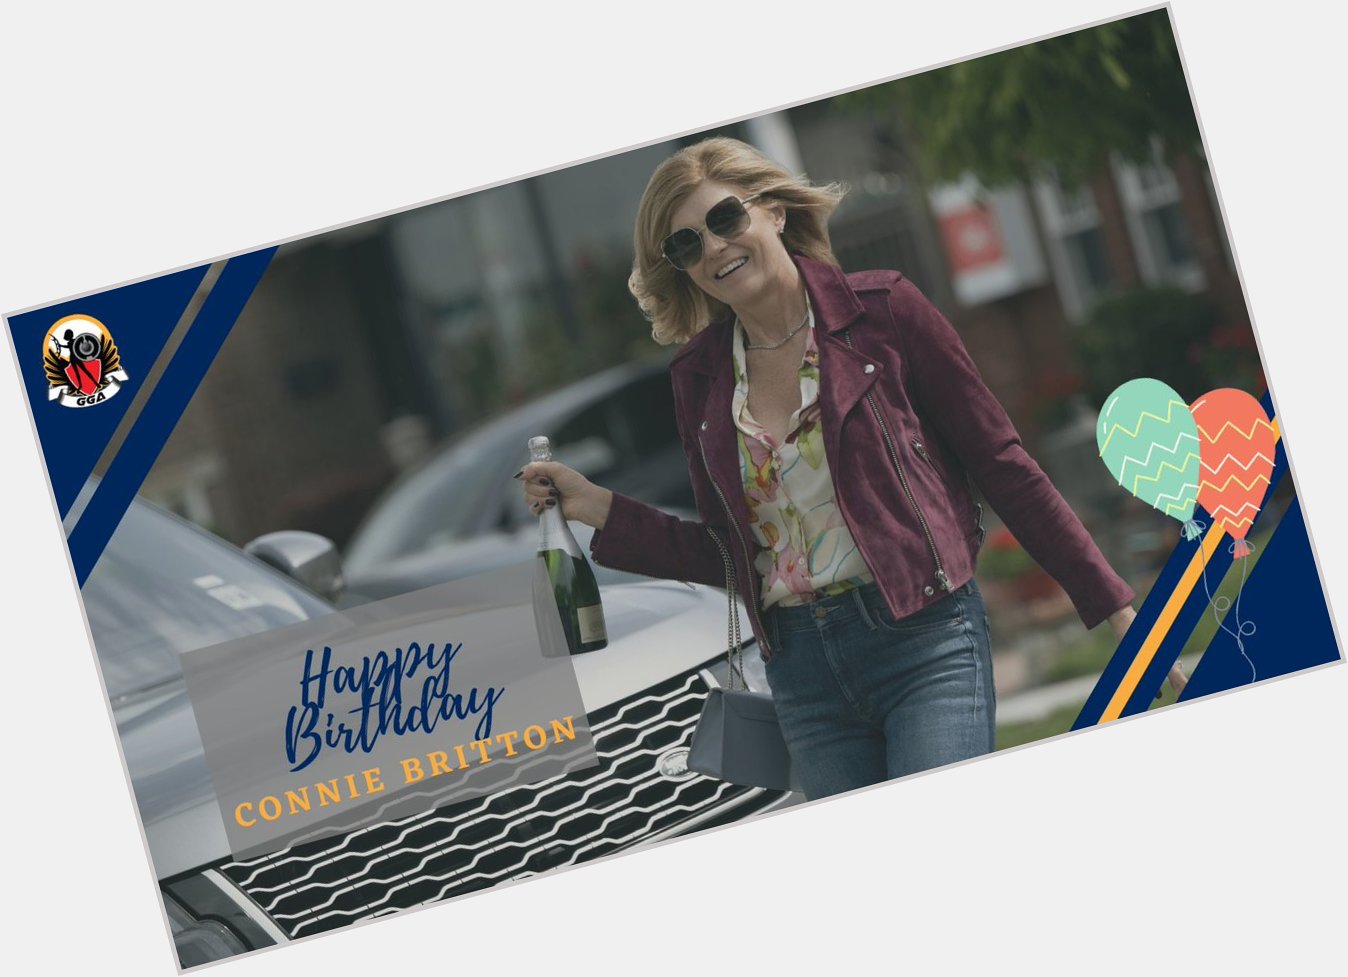 Happy Birthday, Connie Britton!  Which role of hers is your favorite?  